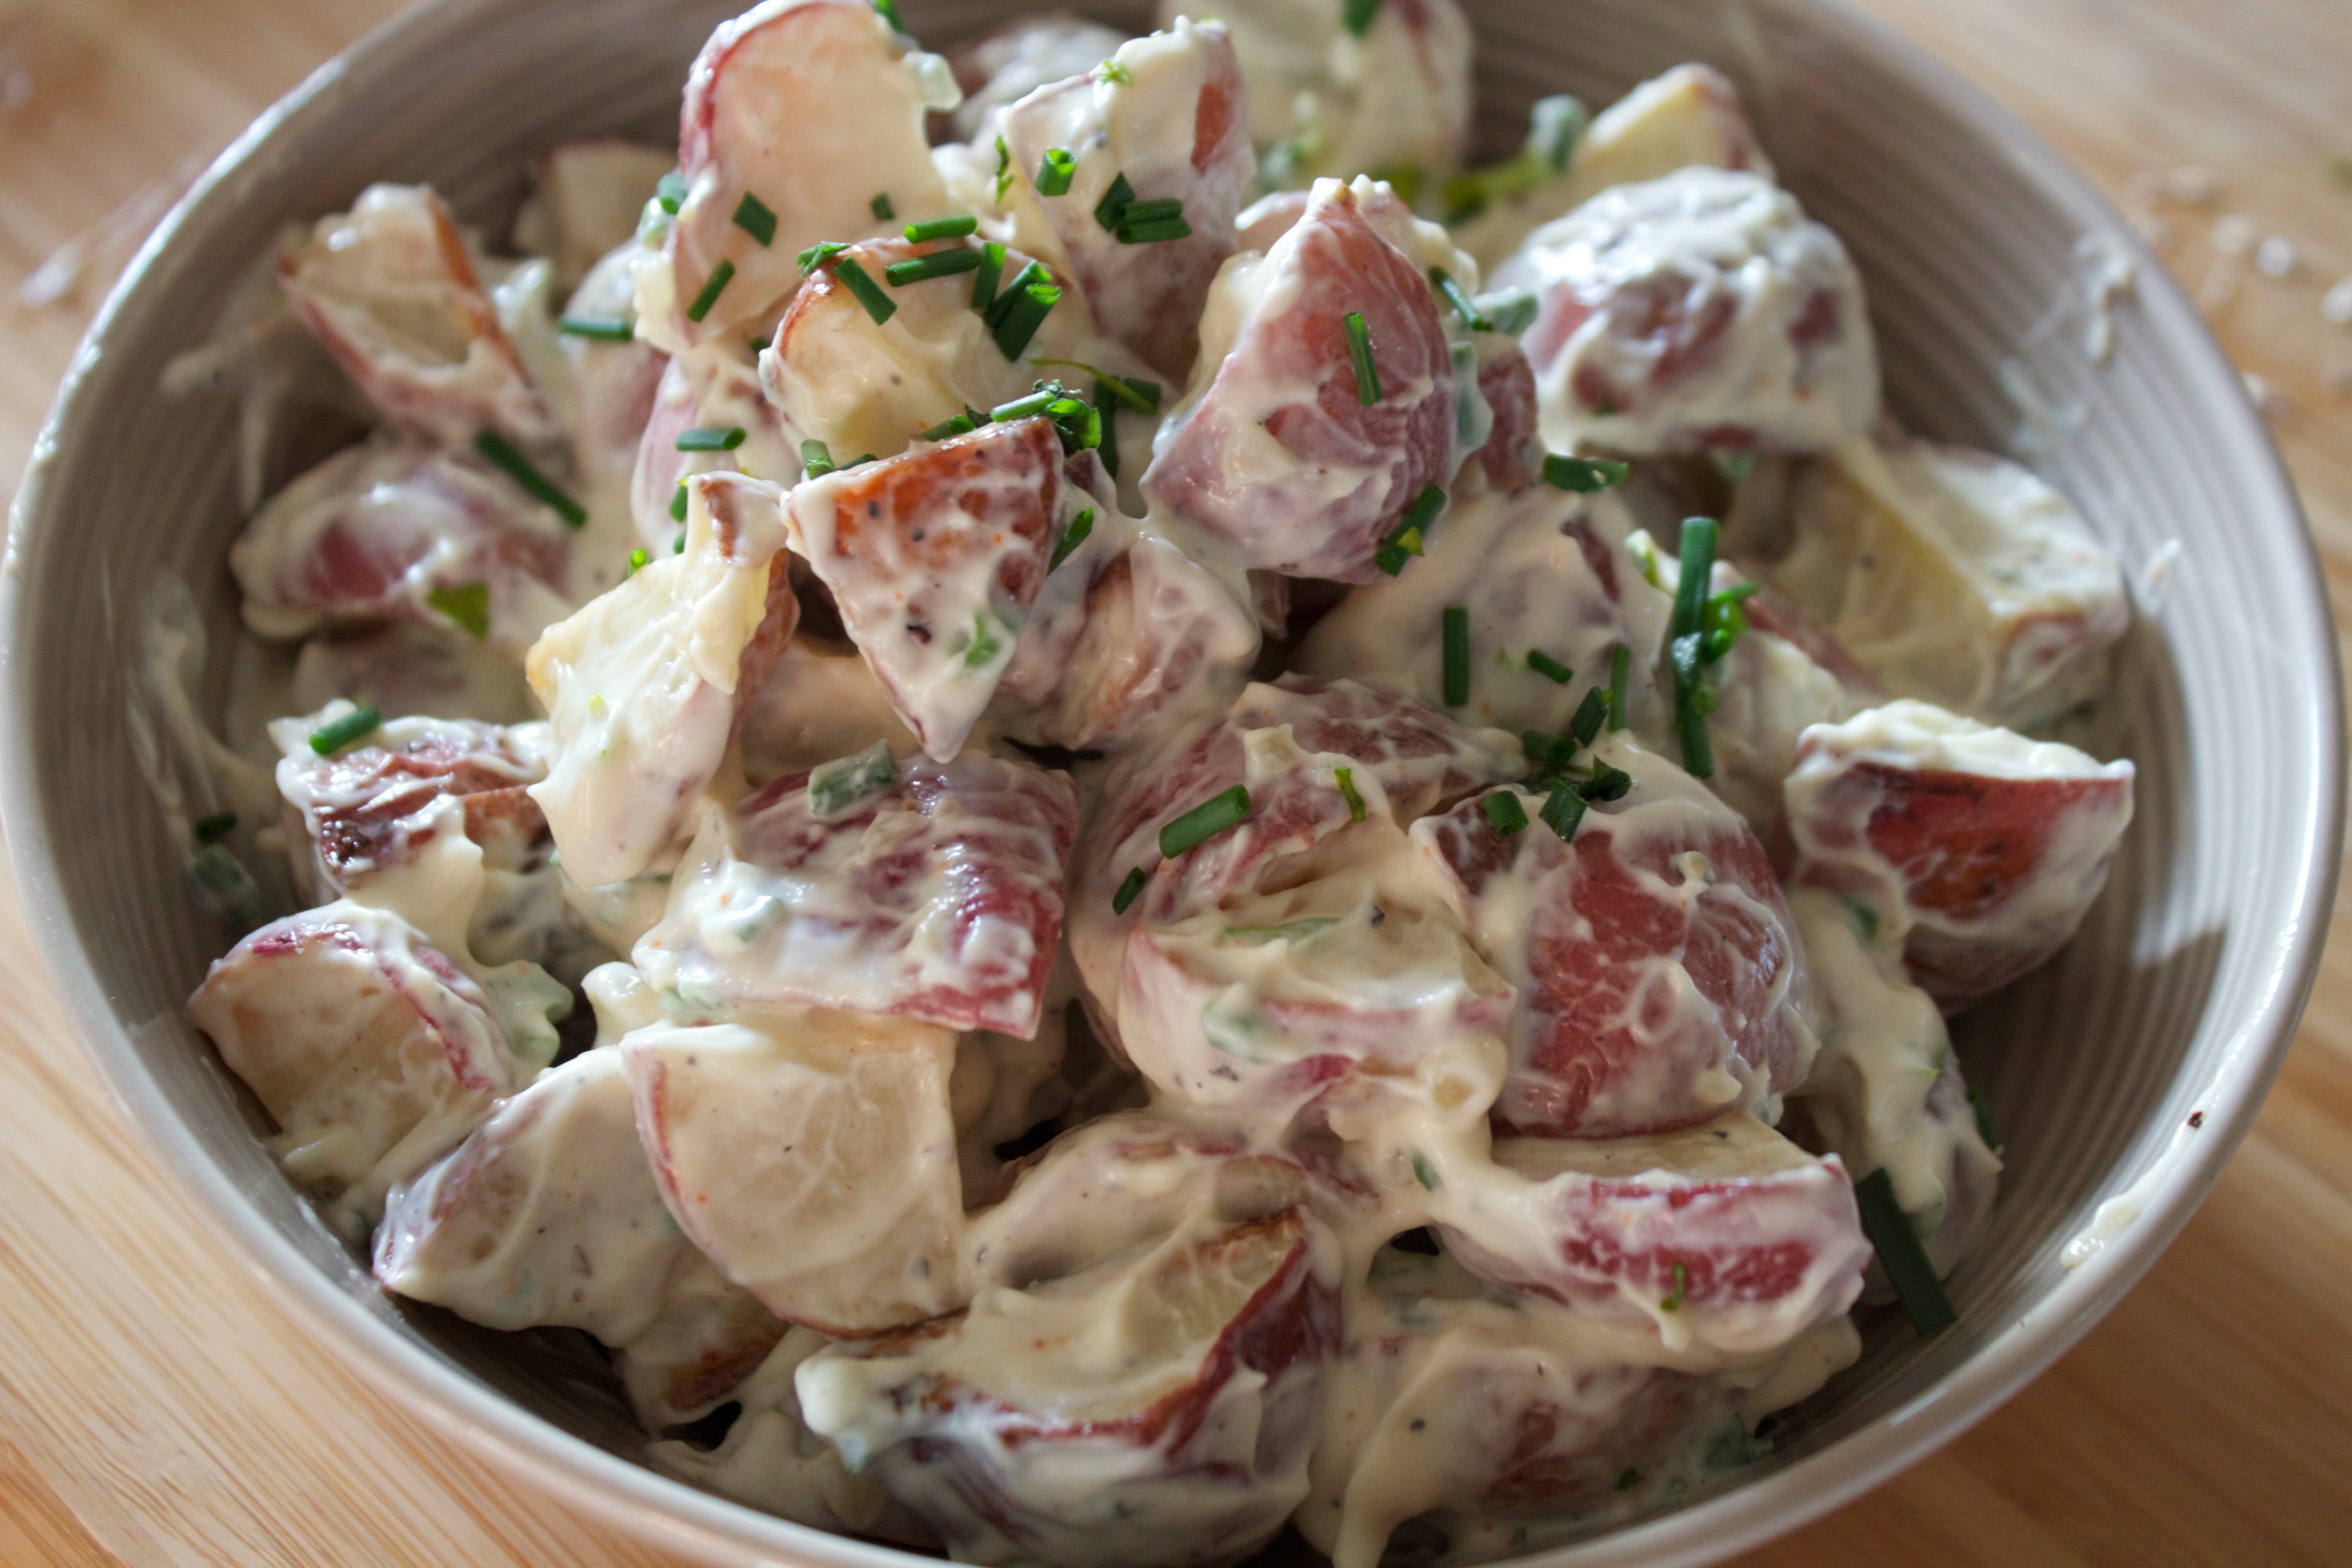 Roasted garlic potato salad with chives